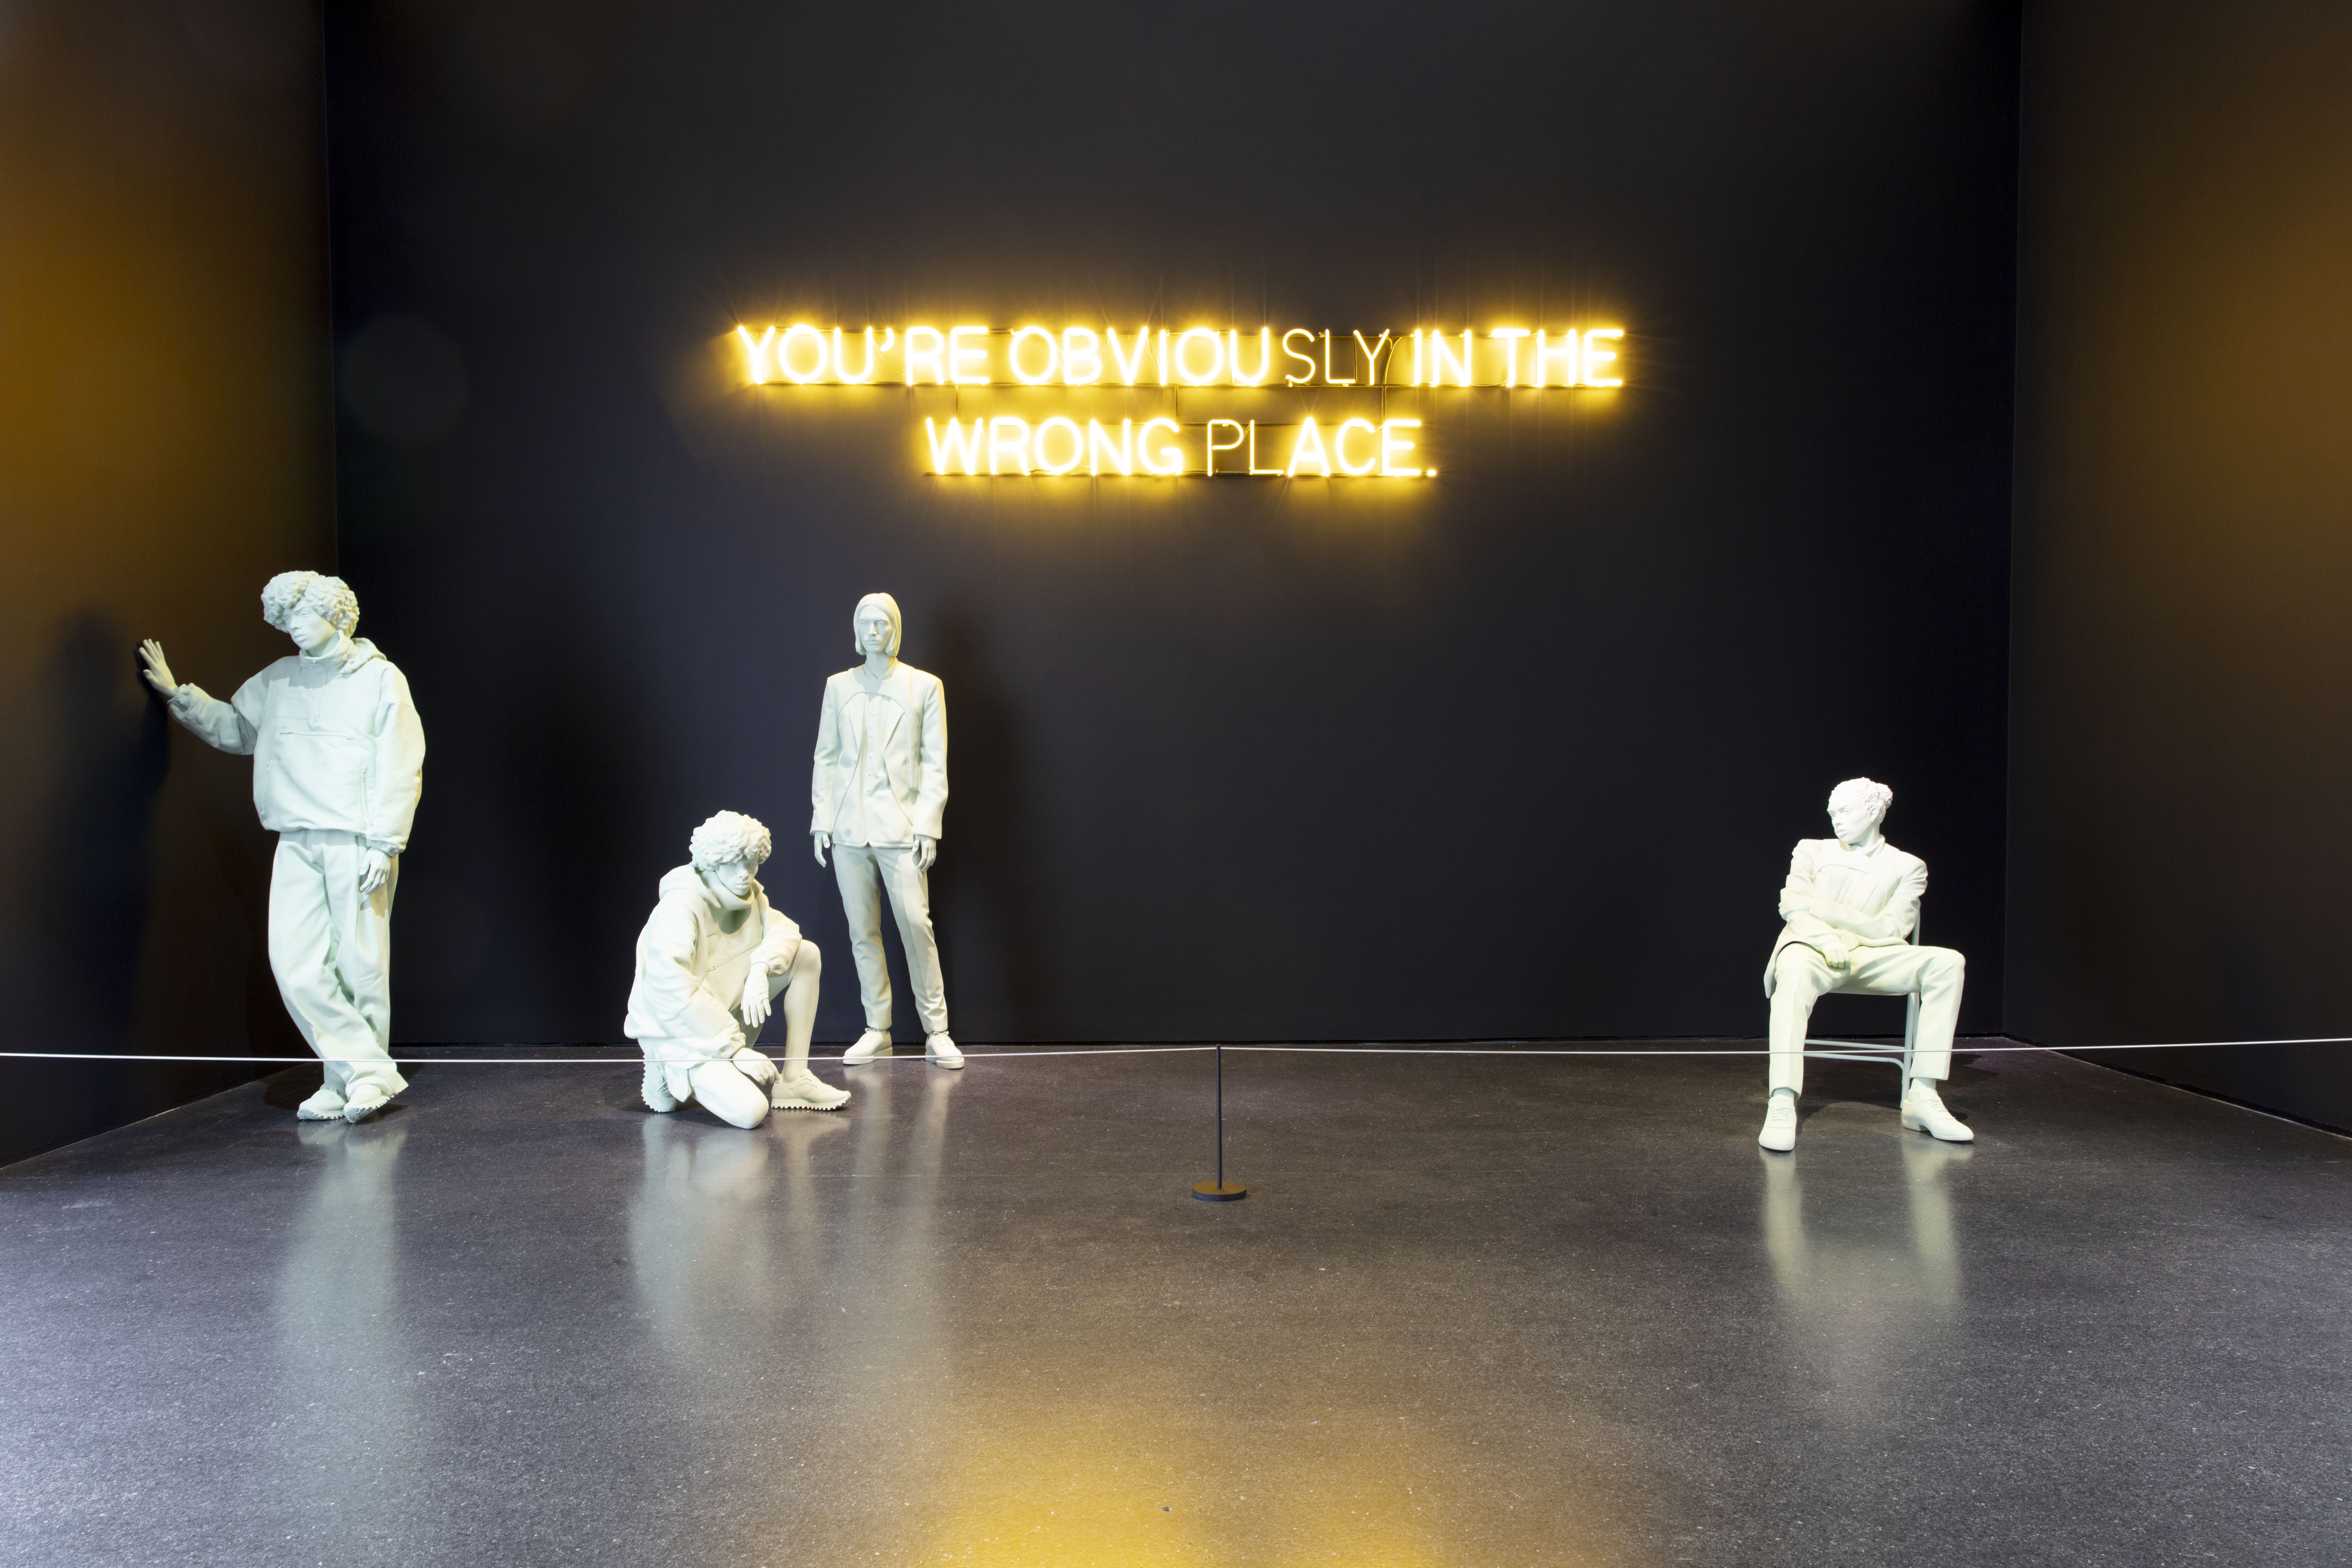 Virgil Abloh's “You’re Obviously in the Wrong Place,” from 2015.